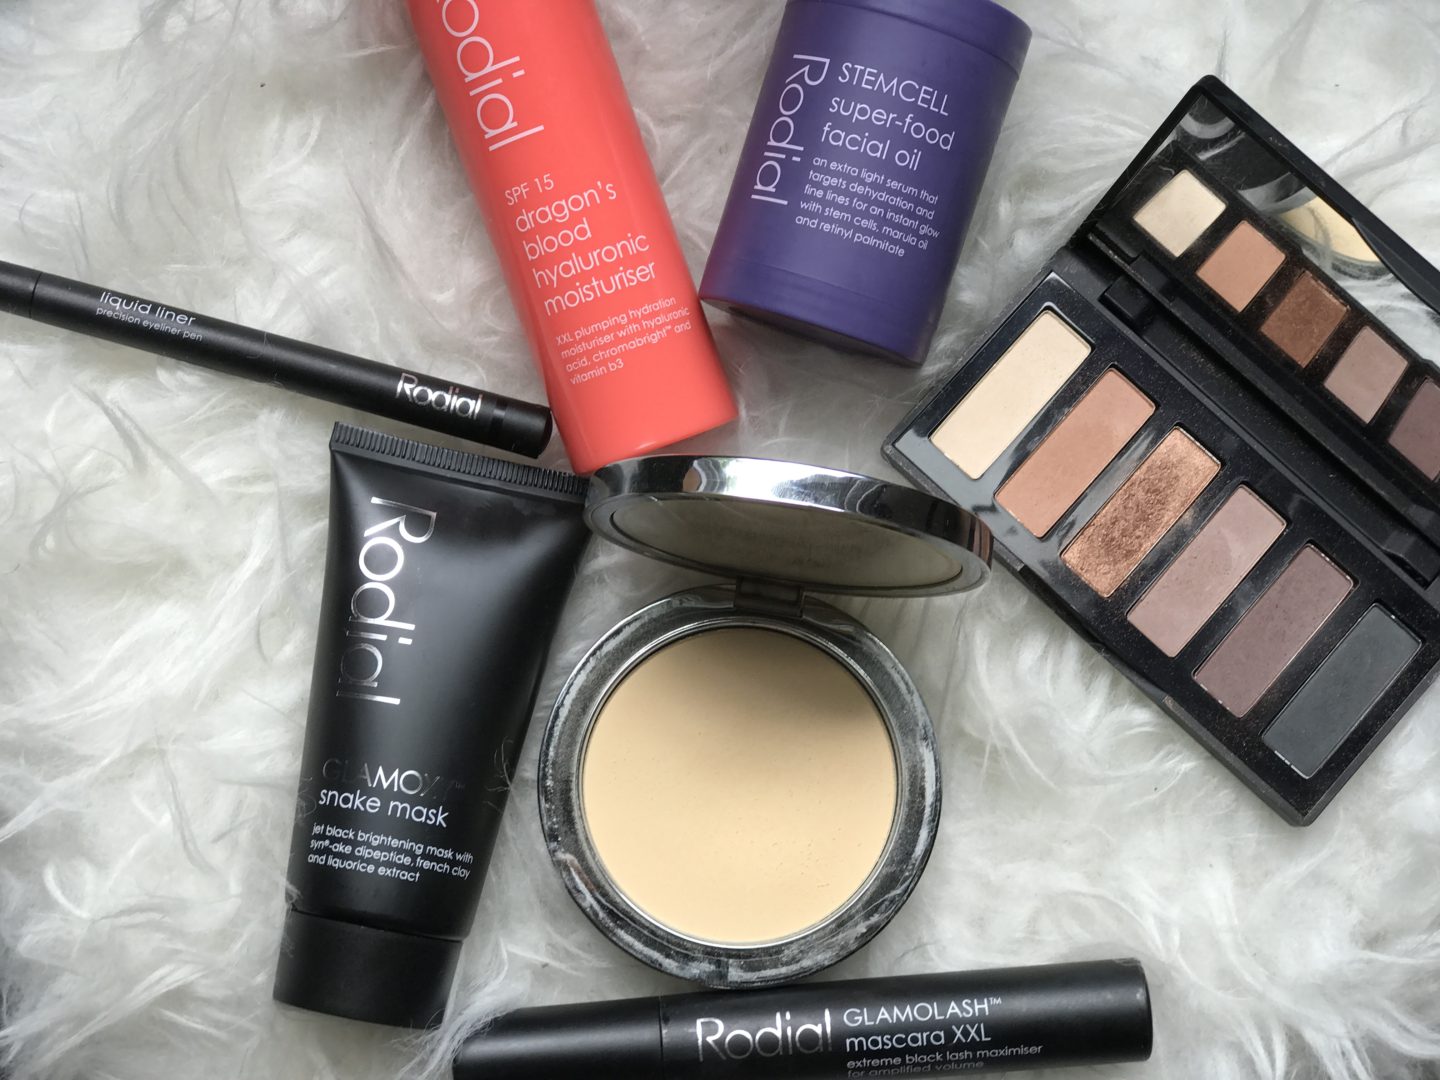 5 Minute Mommy Glam & Go (Featuring Rodial Beauty)